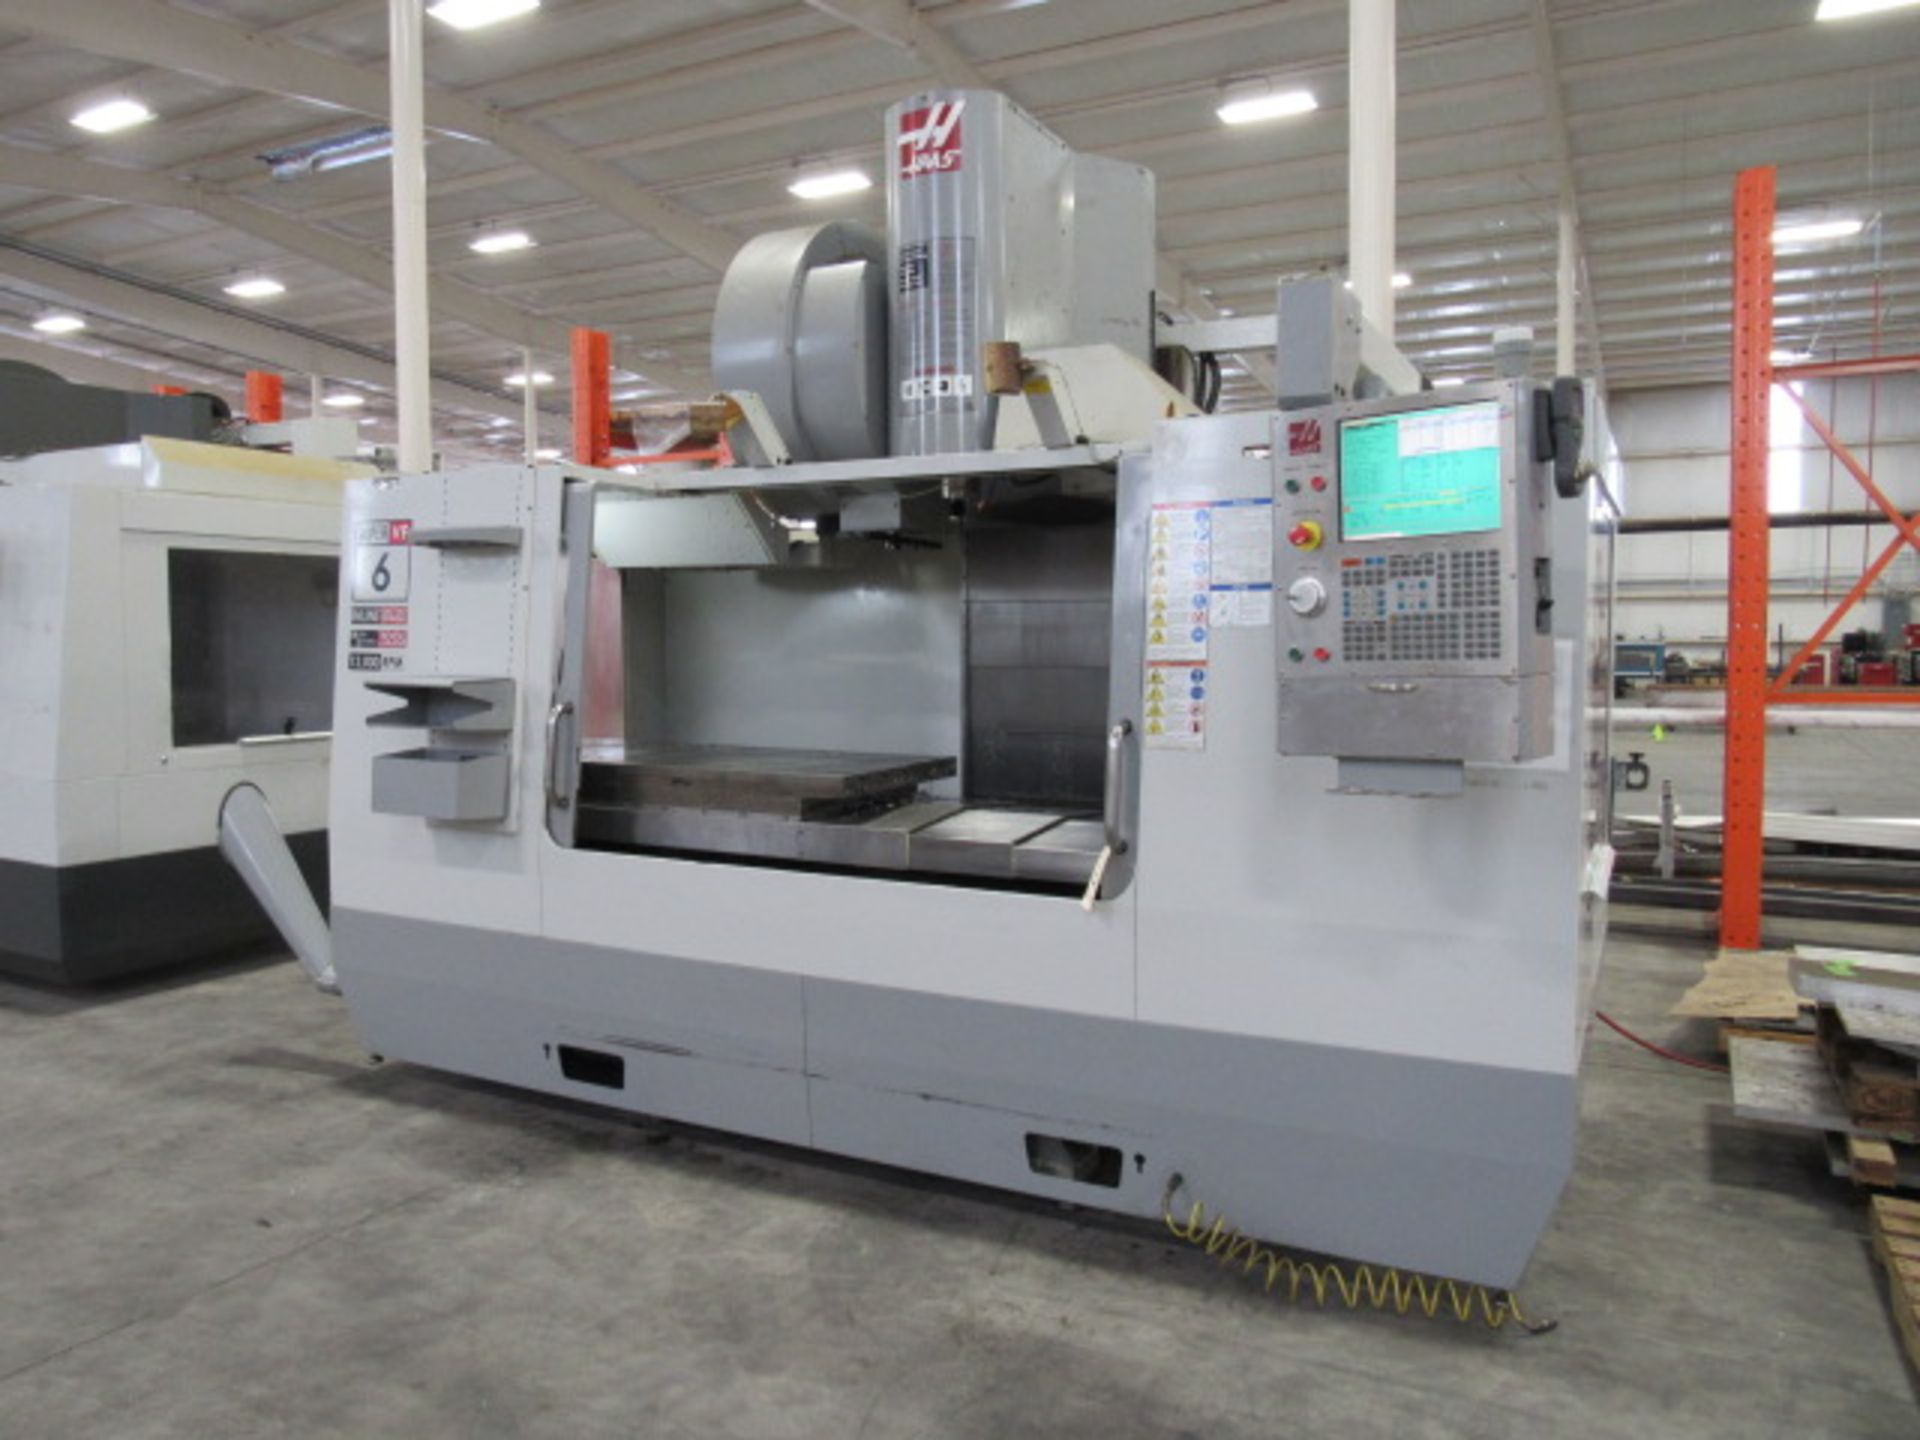 Haas Super VF6-SS/40 CNC Vertical Machining Center with #40 Taper Spindle Speeds 12,000 RPM, 64'' - Image 3 of 6